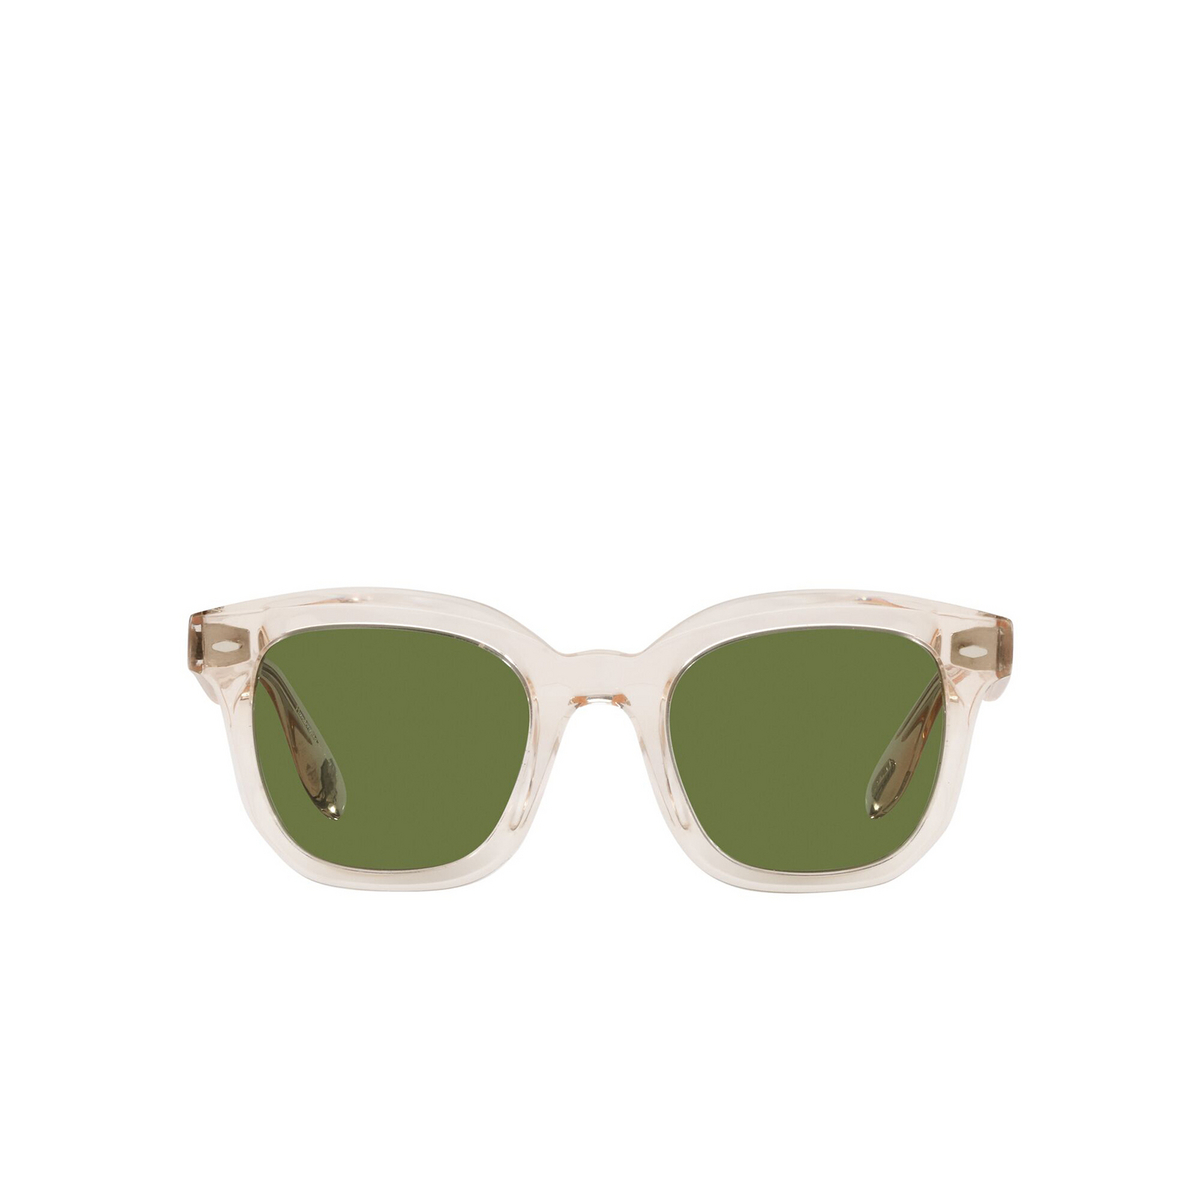 Oliver Peoples® Square Sunglasses: Filu' OV5472SU color Buff 109452 - front view.